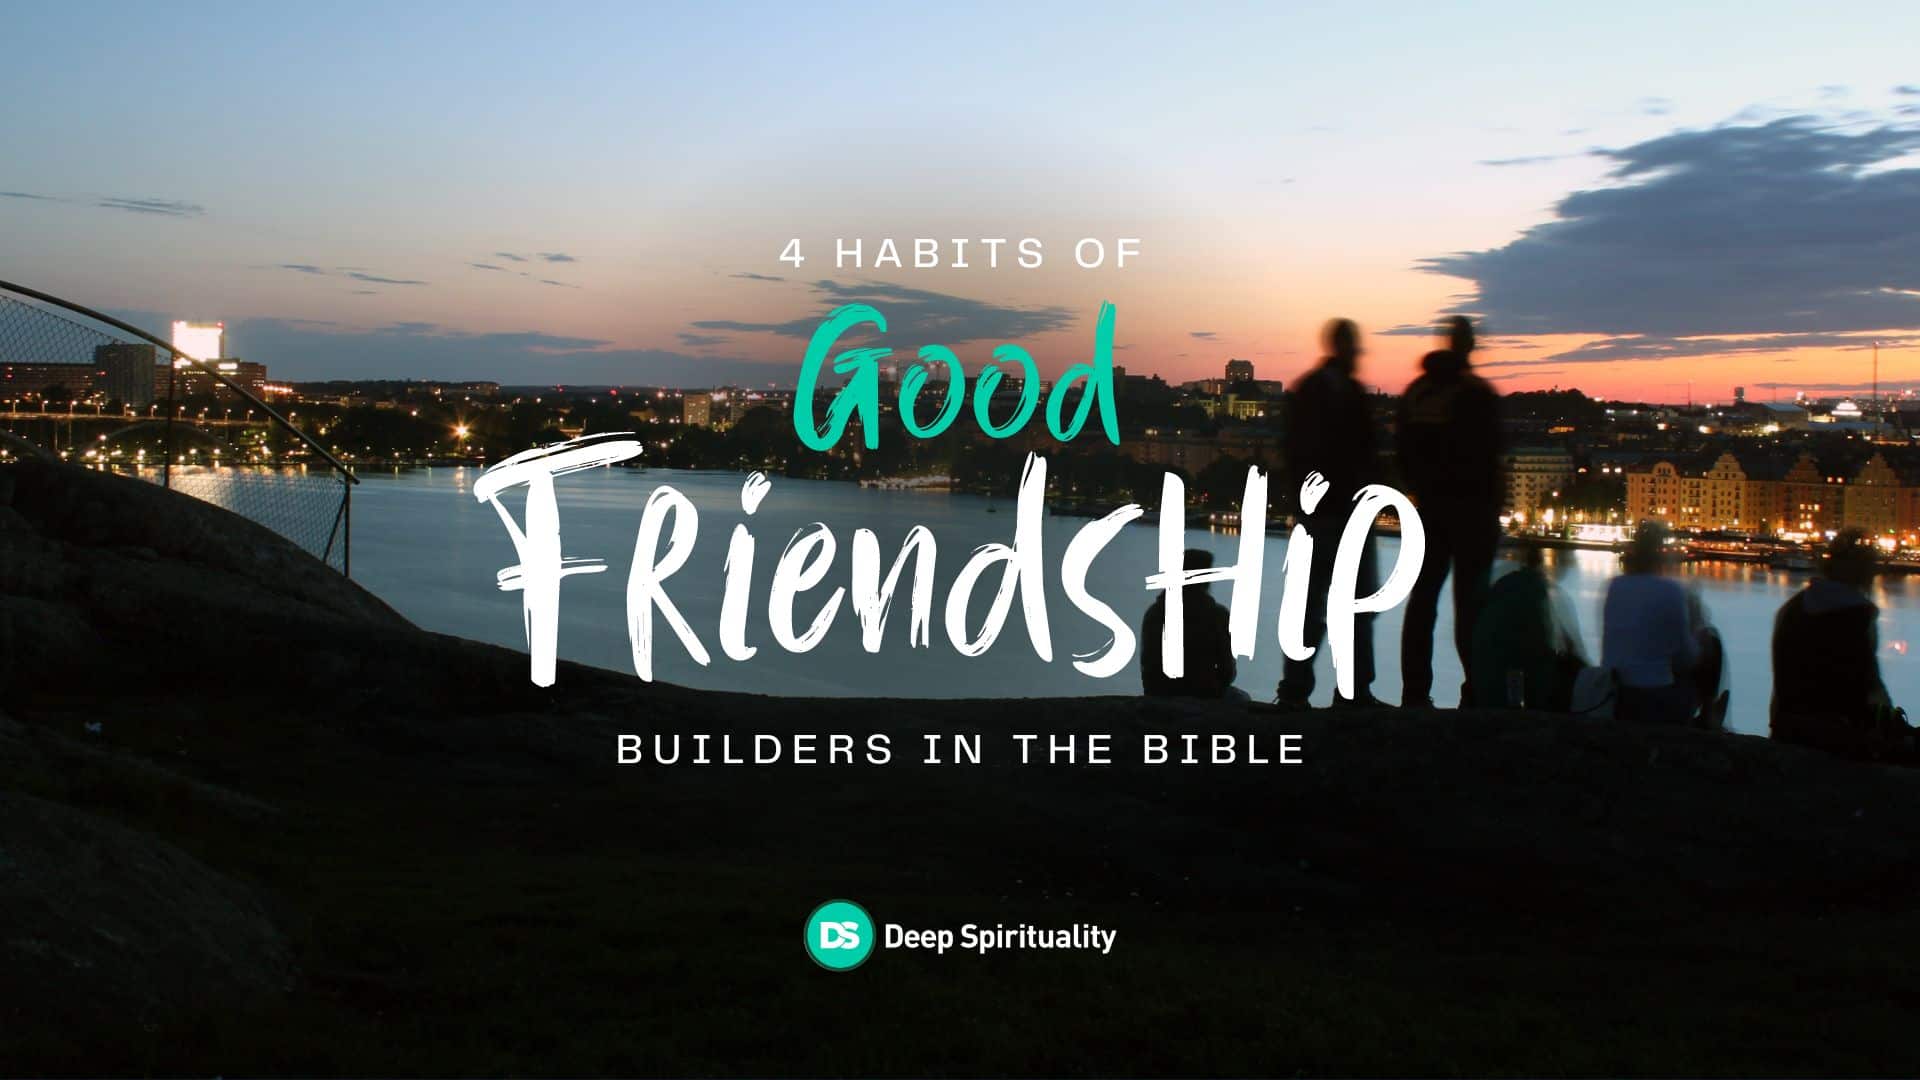 4 Habits to Build if You Want Good Friendships, According to the Bible 6